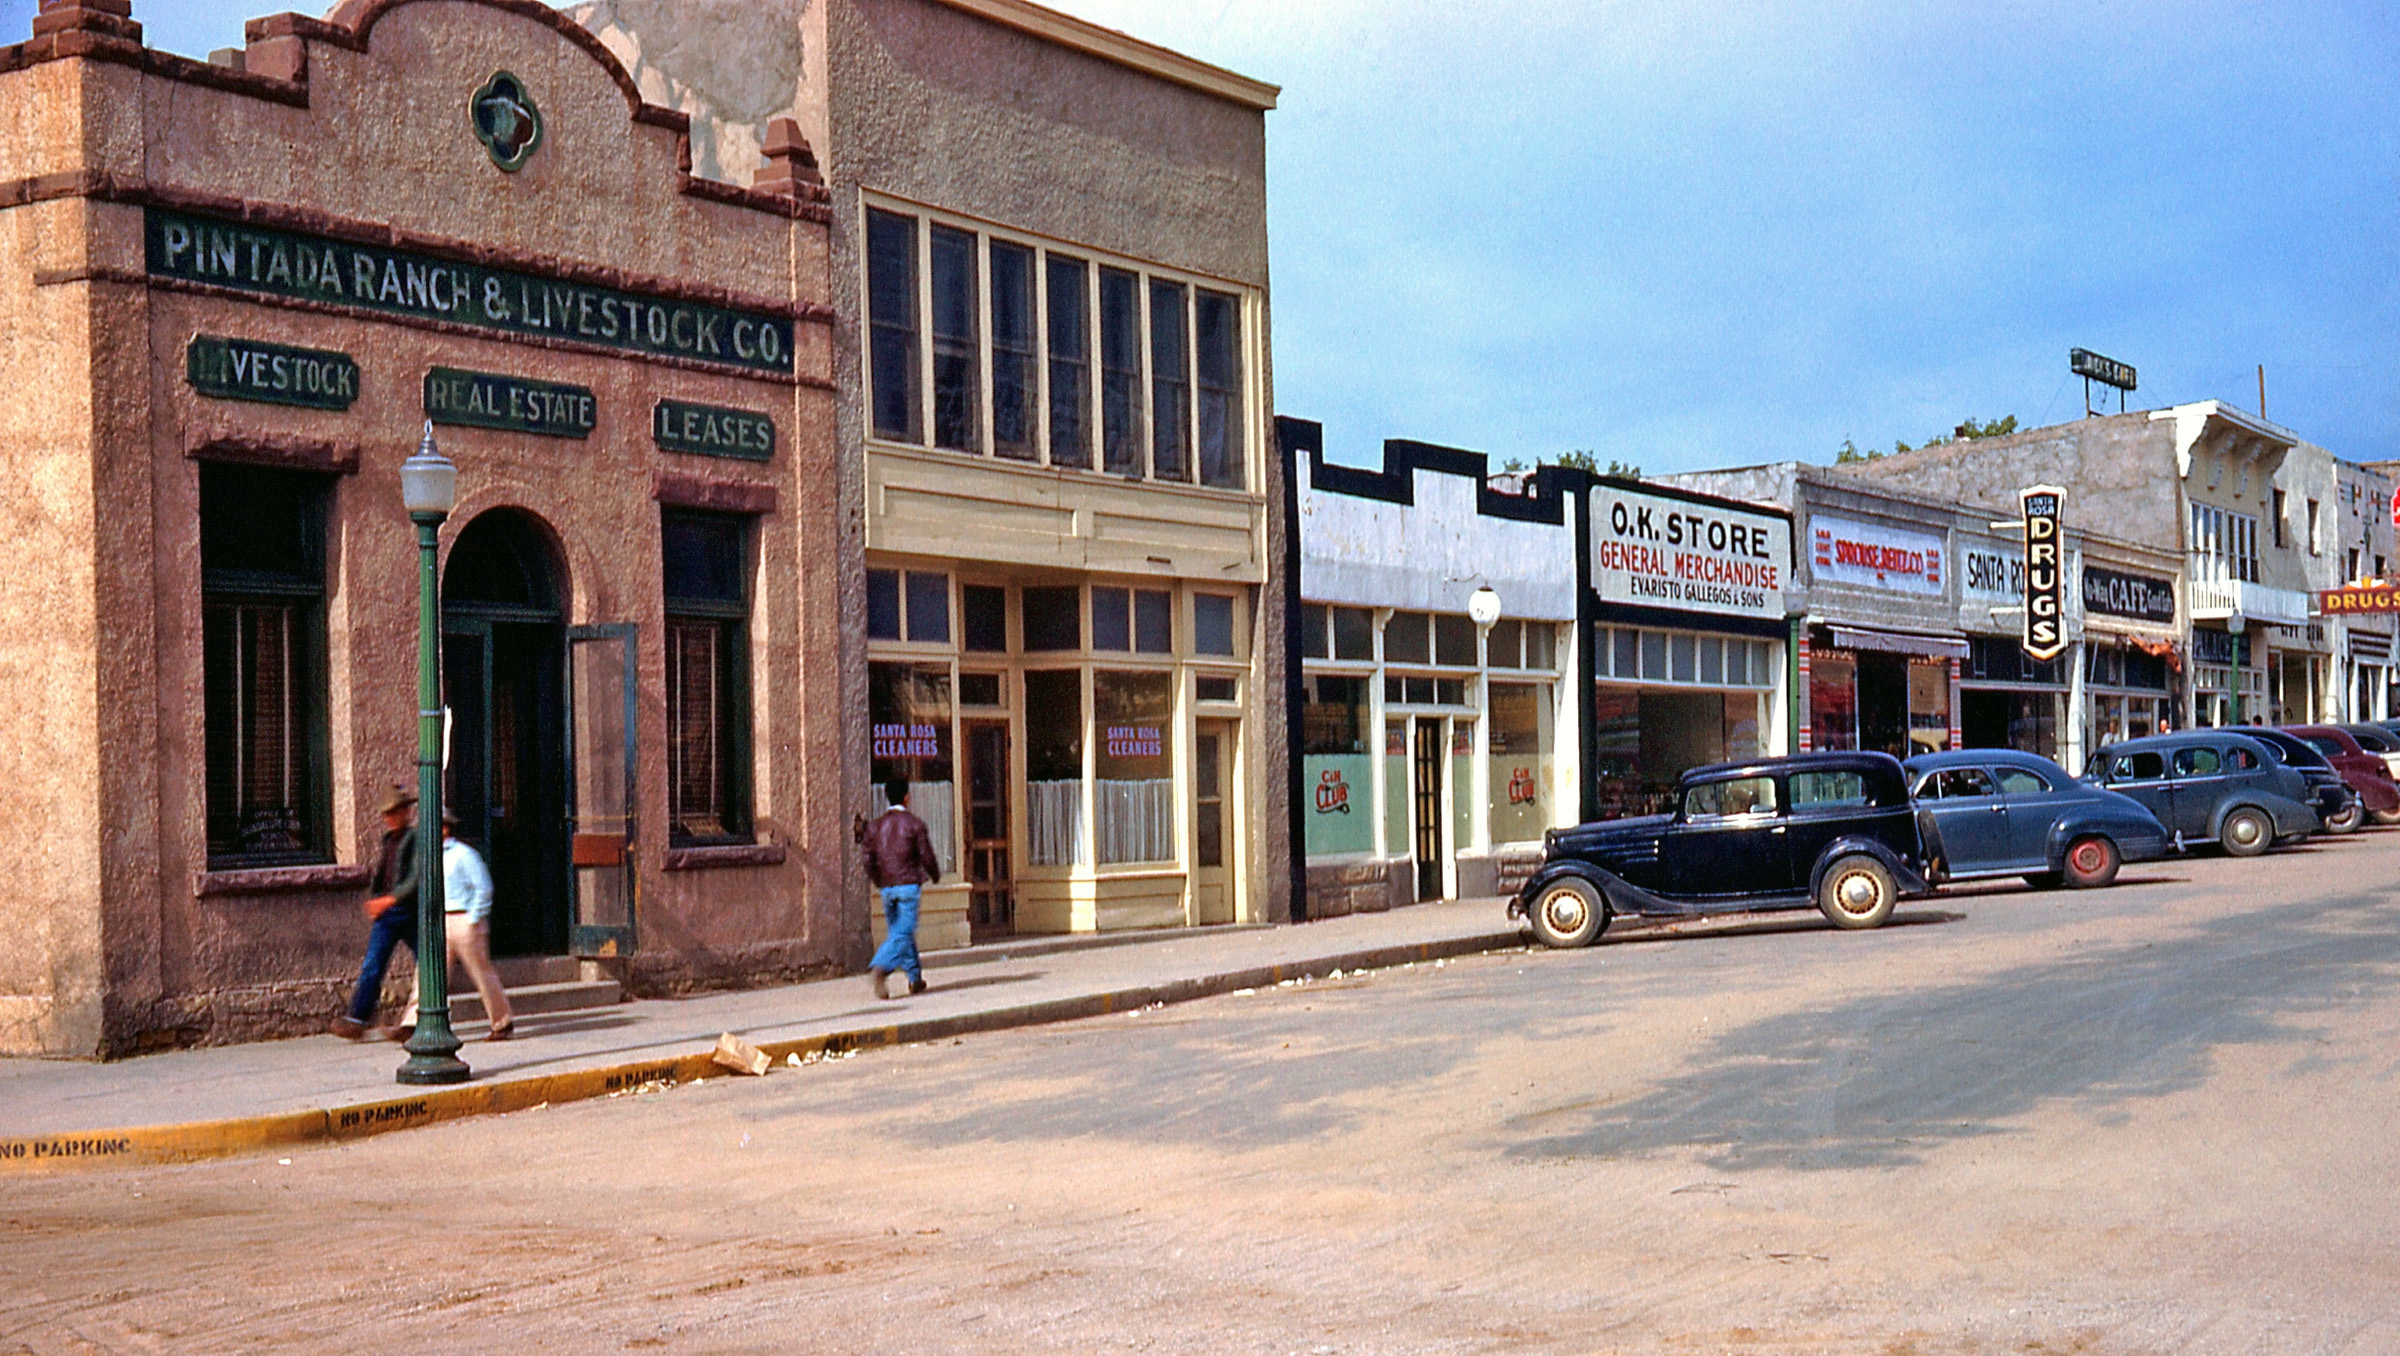 Evaristo Gallegos' O.K. Store was "opposite the courthouse," so this is Fourth Street in Santa Rosa, New Mexico. Though this Kodachrome slide was undated, others in the set had handwritten dates in the mid-1940s. View full size.